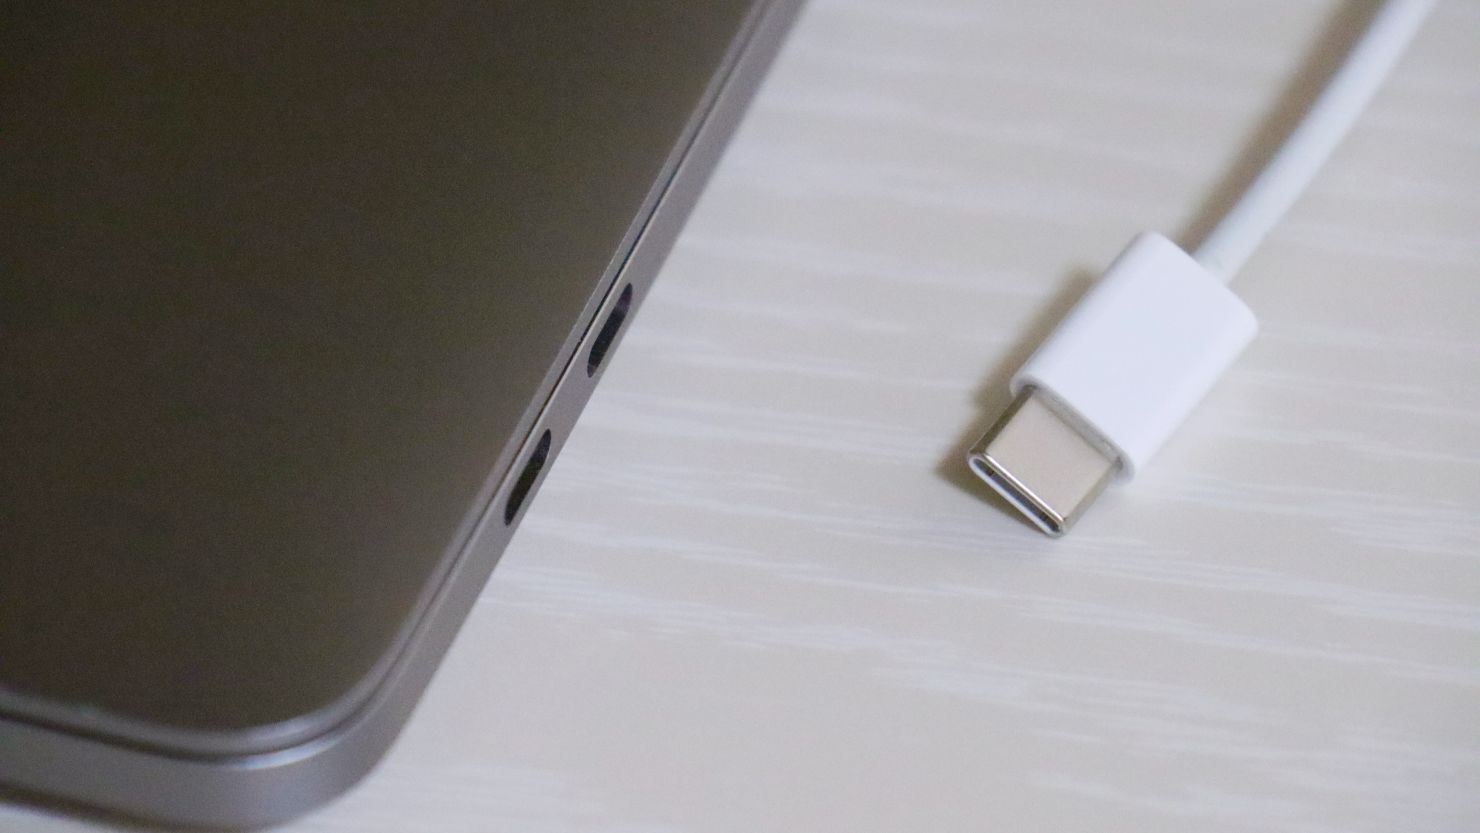 How to ensure you're buying the right USB-C cable for your MacBook